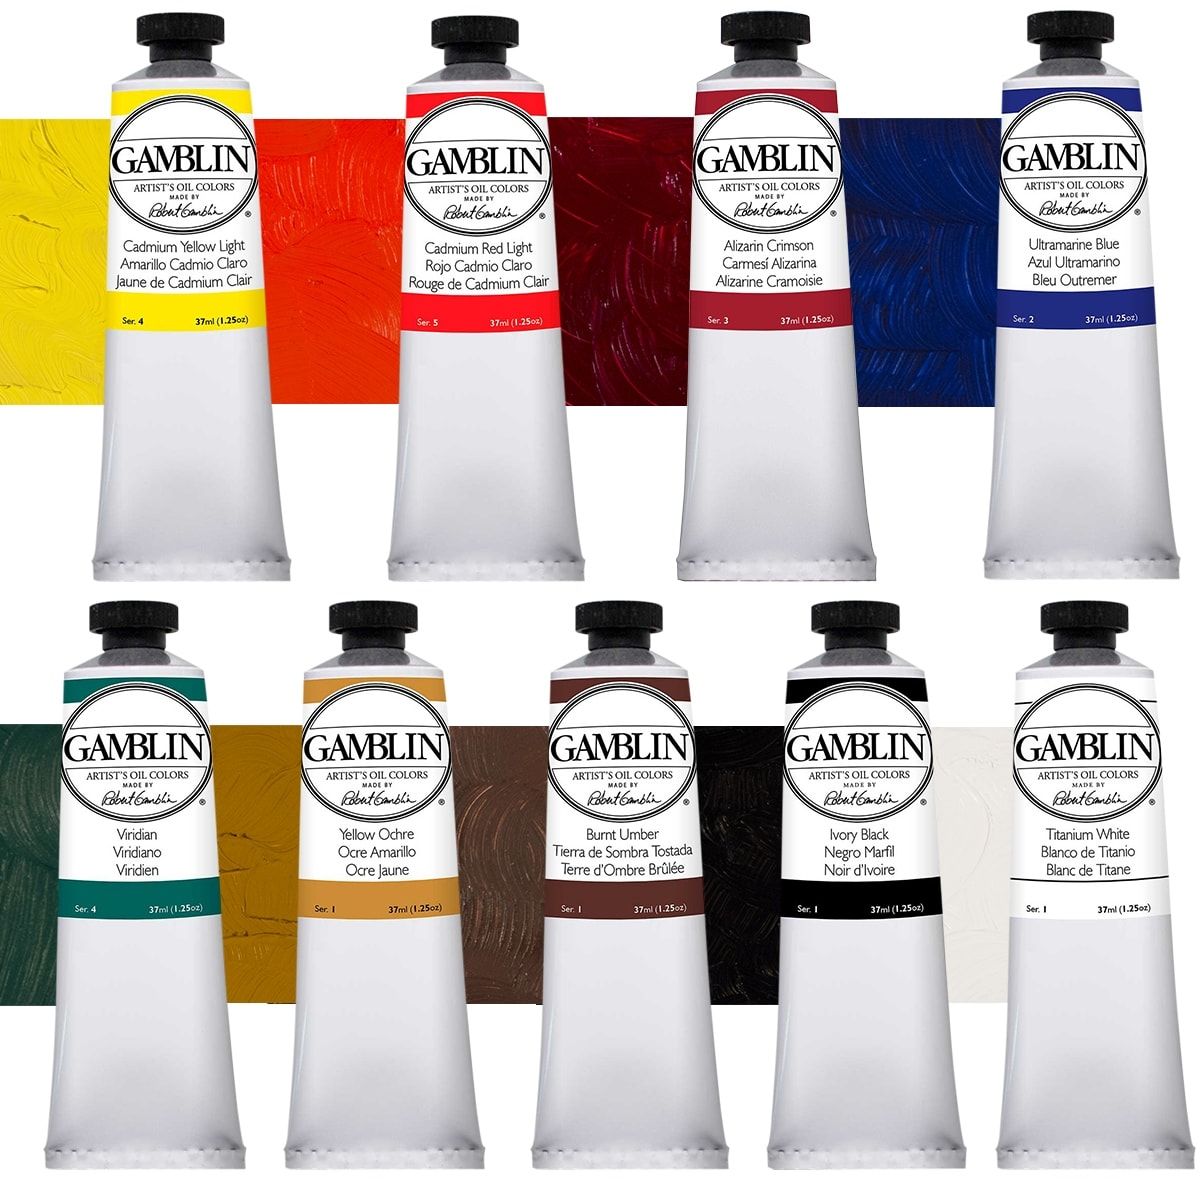 Gamblin Introductory Artist Oil Set Review 